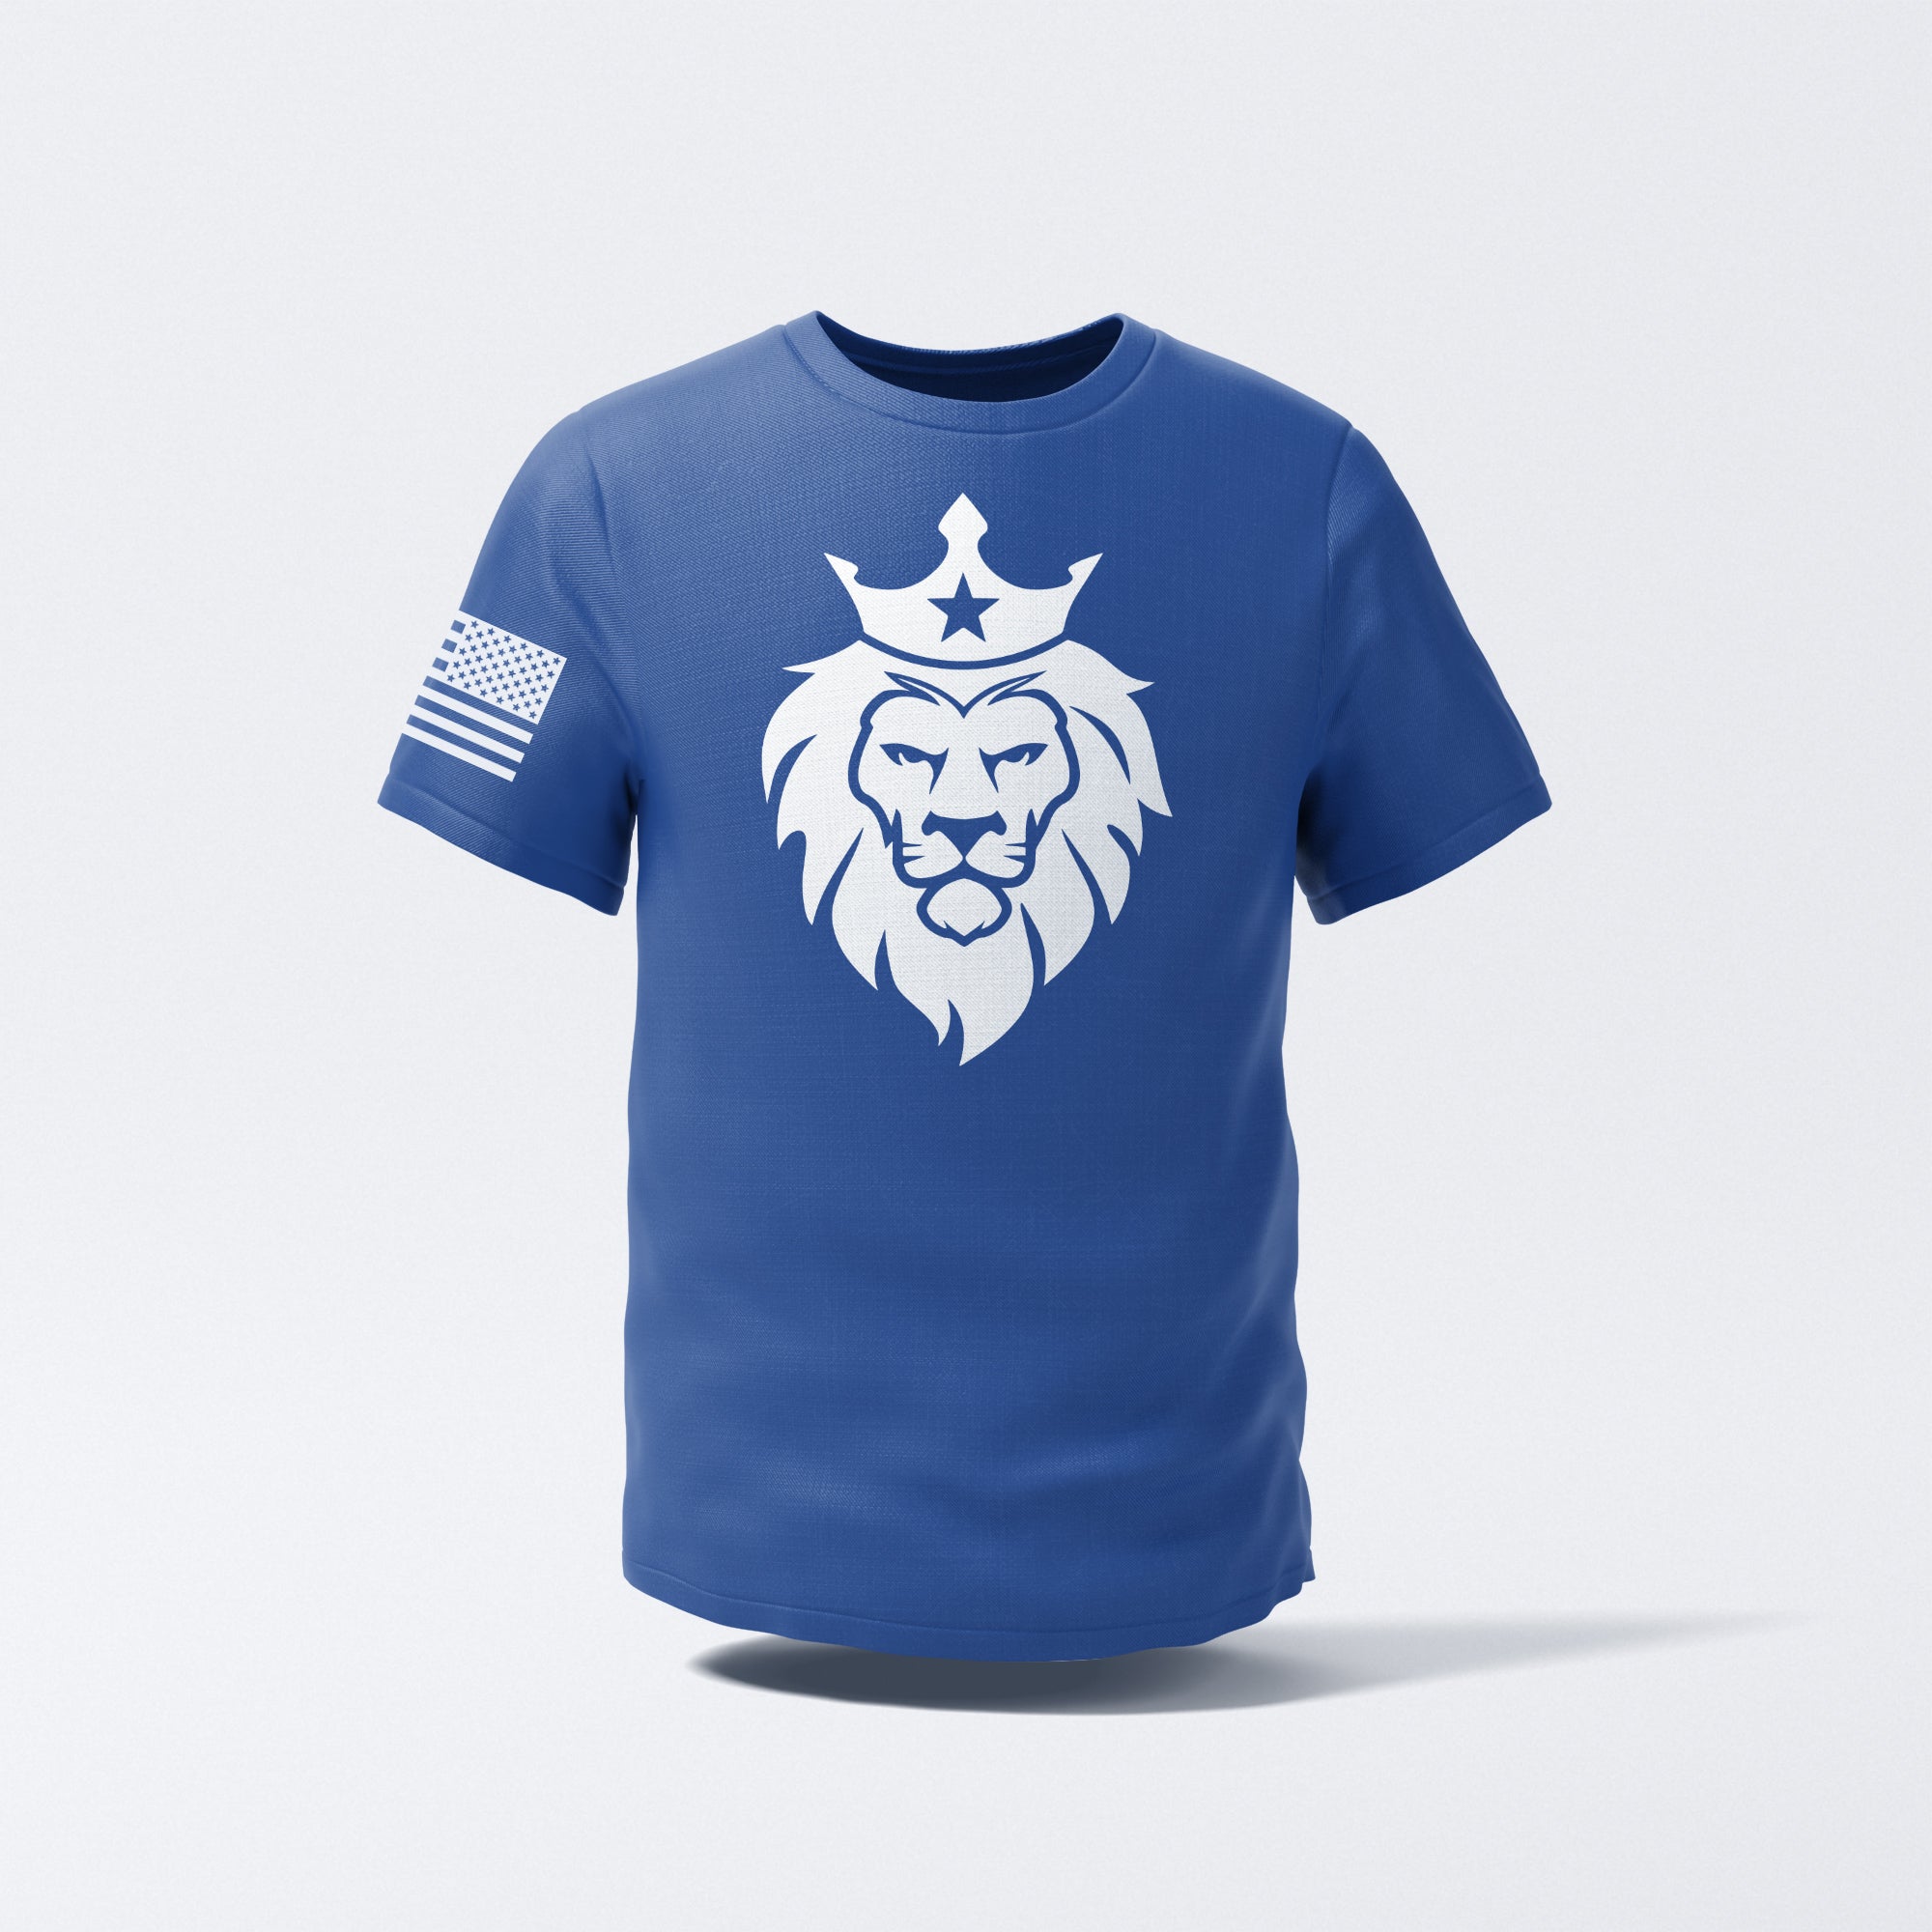 King of the Jungle Flag Tee